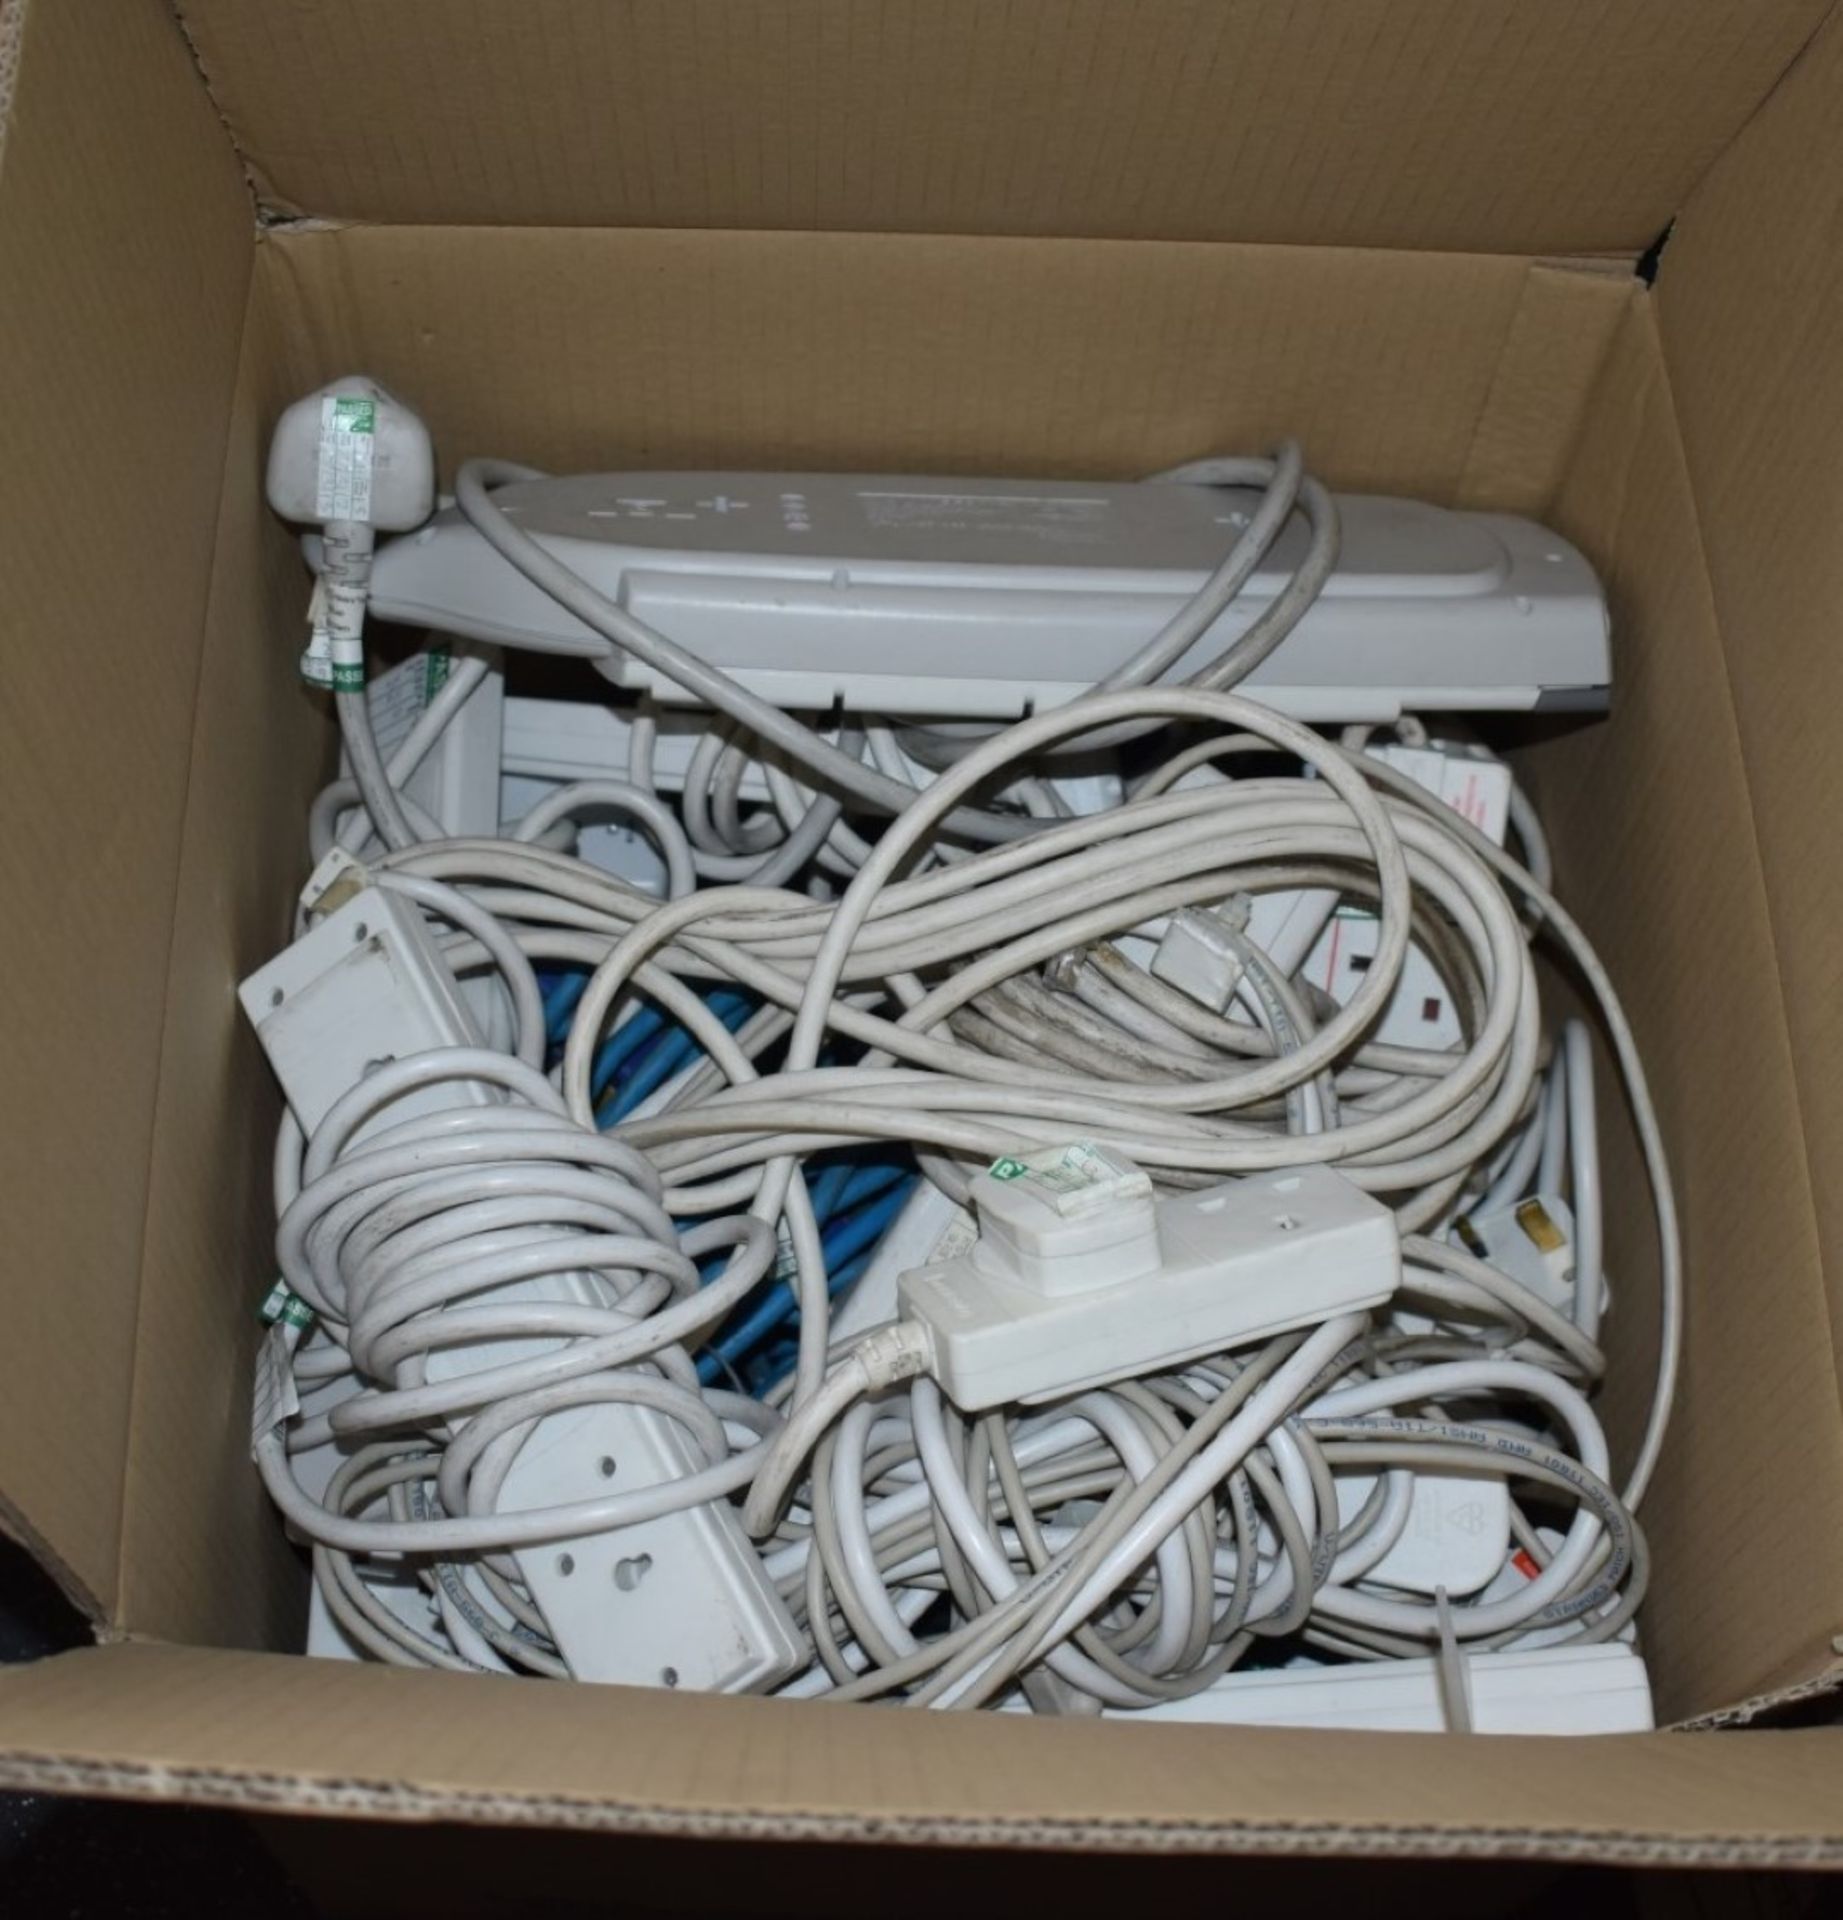 1 x Box Full of 240v Extension Plug Cables